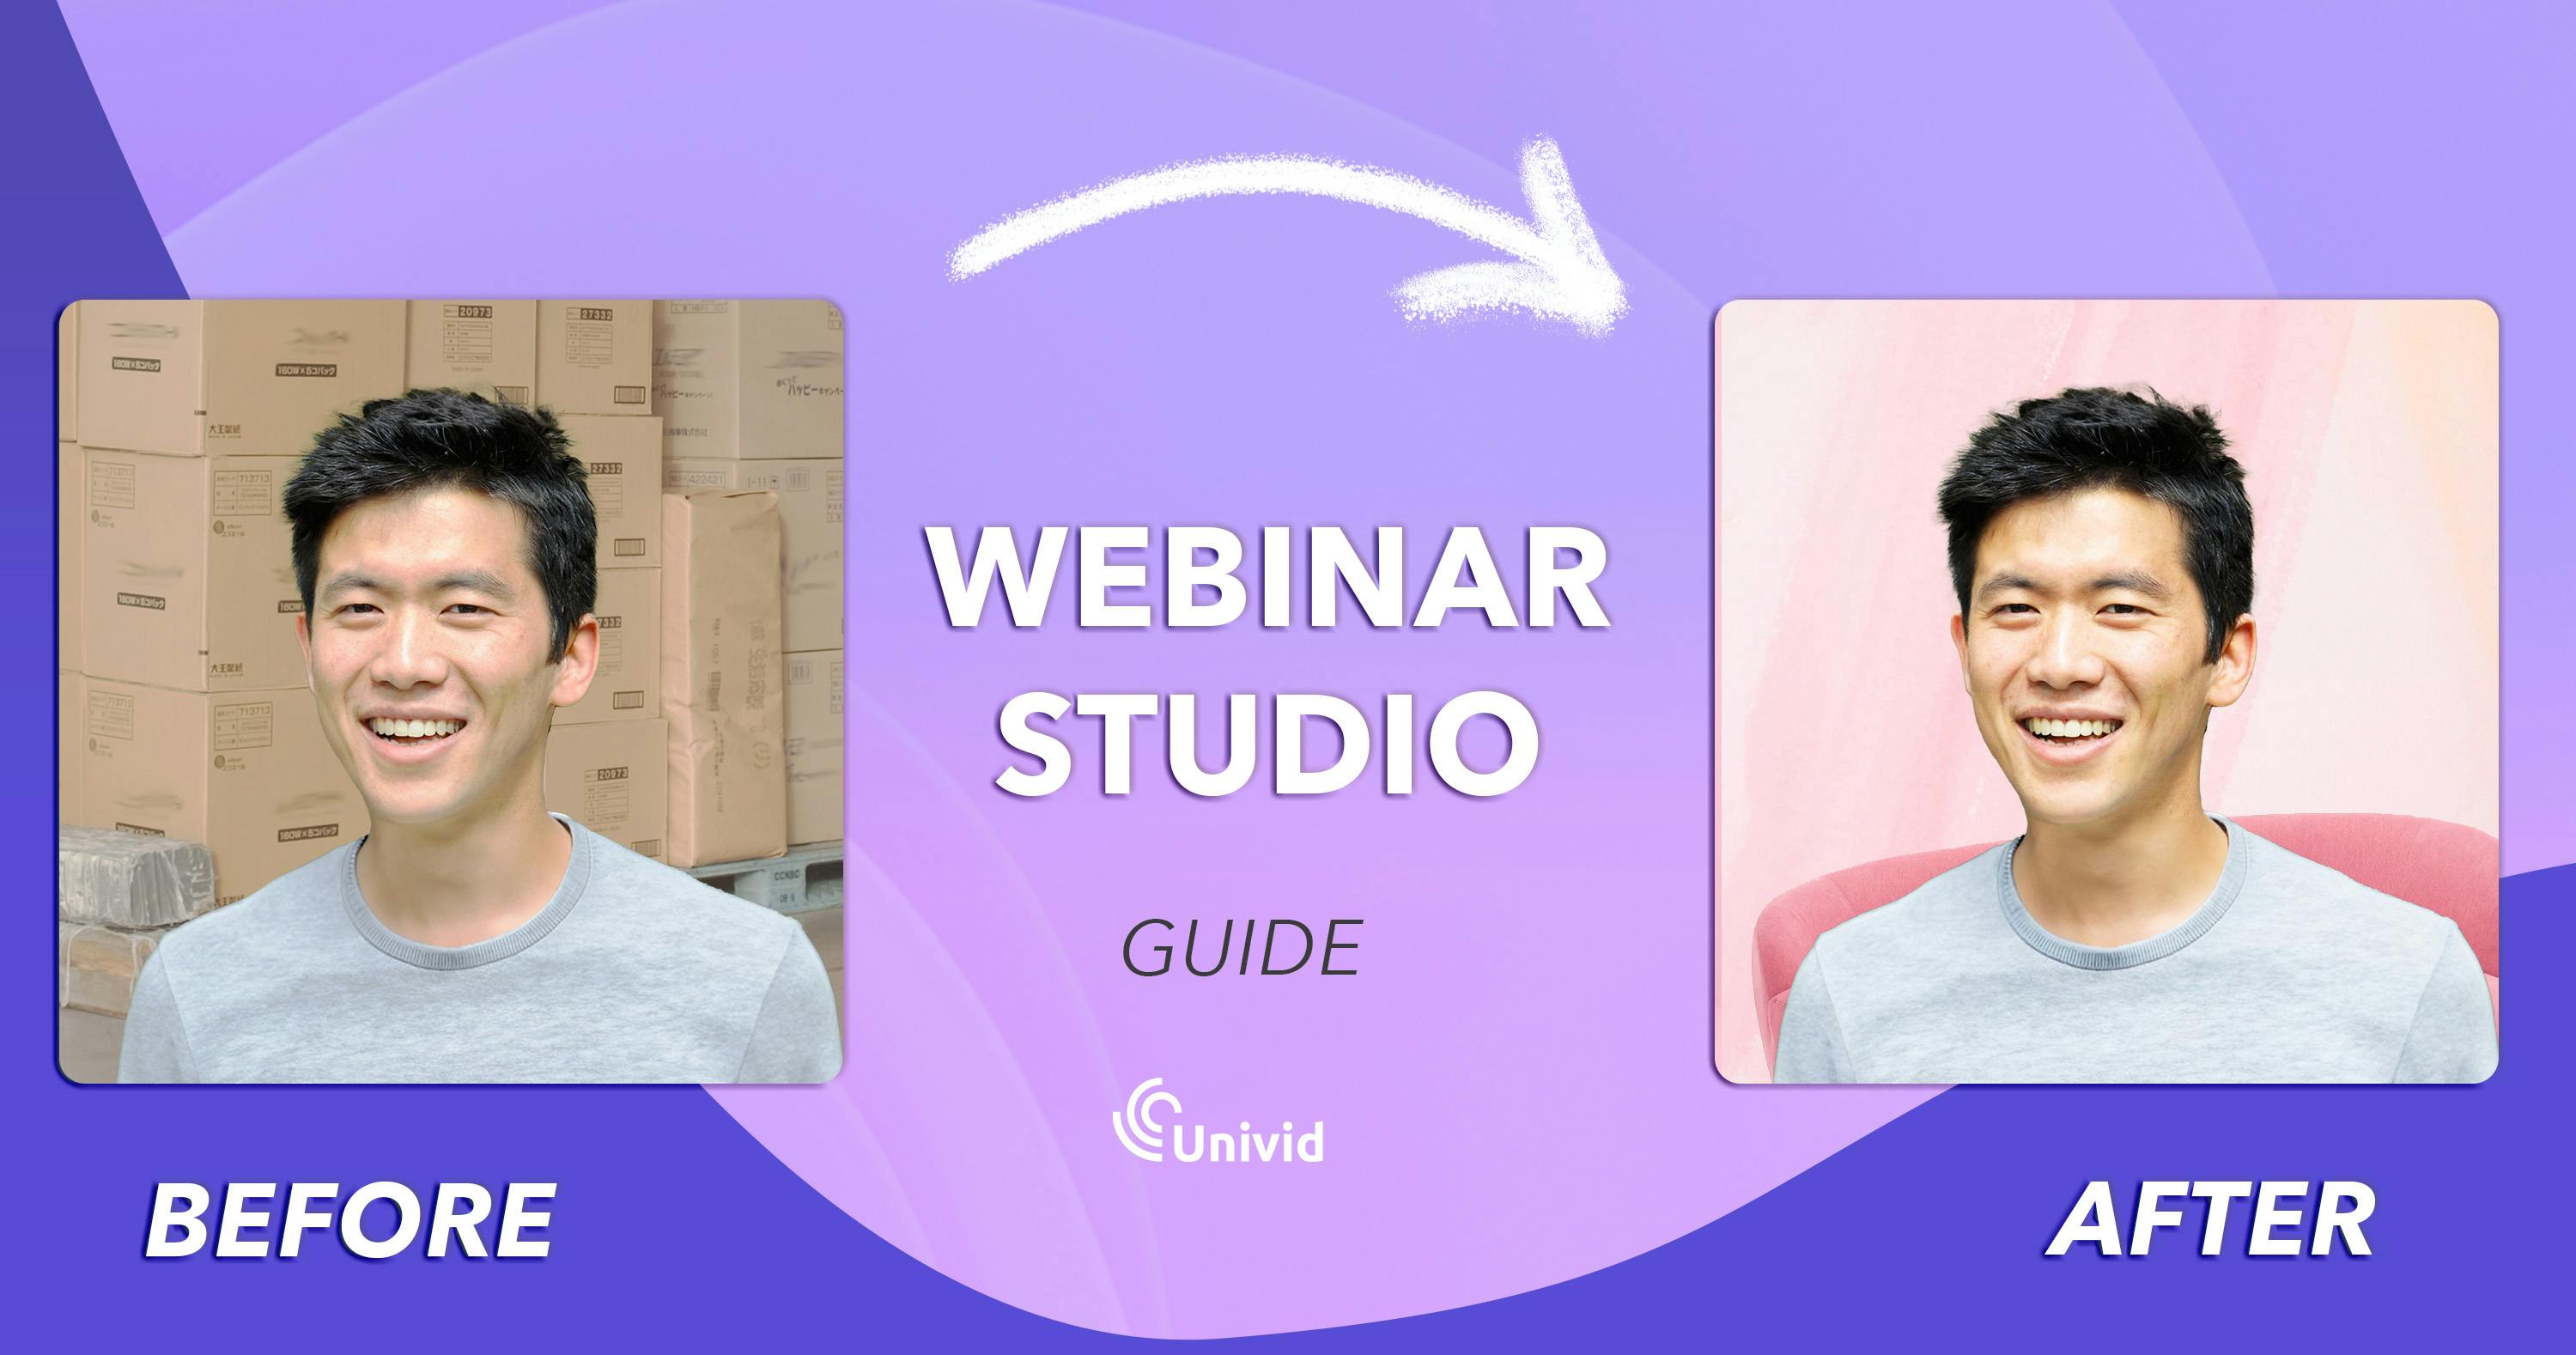 Learn about the basic equipment needed to make your in-house webinar studio shine. 6 easy tips to build a professional studio setup for video production, webinars, and livestreaming.